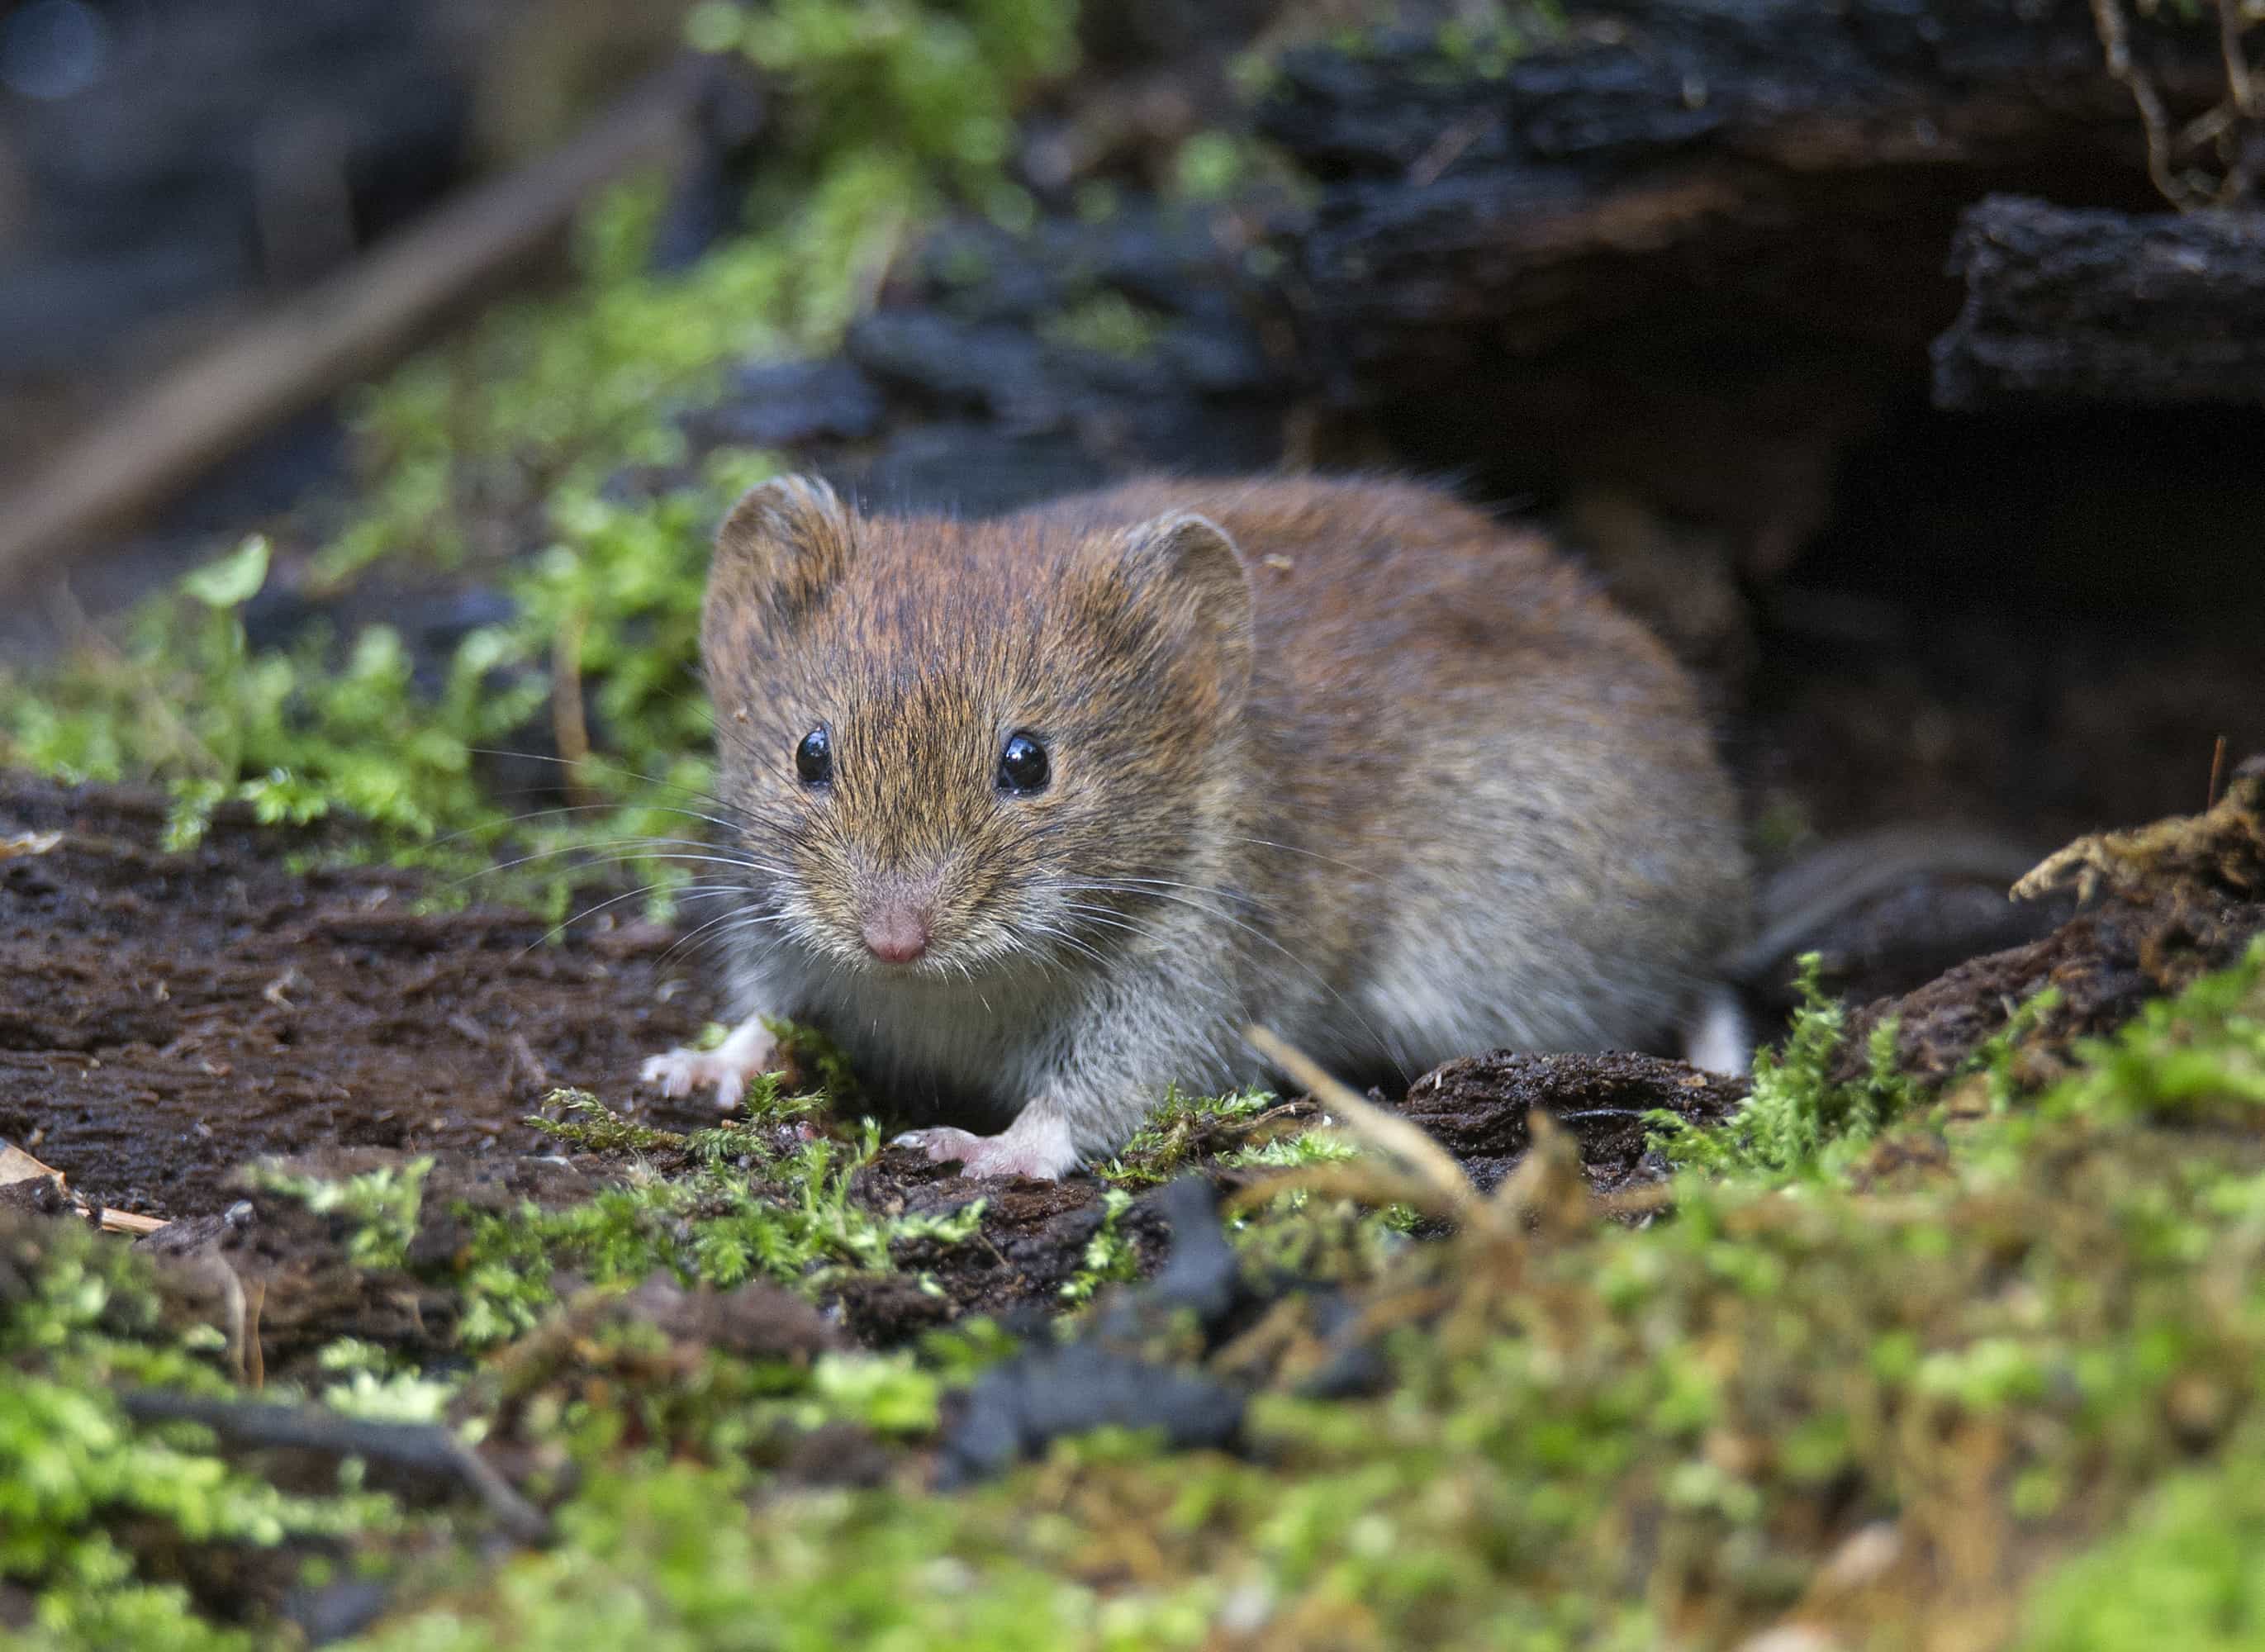 Pesky Voles Why We Get Them and How To Control Them Pest Control 